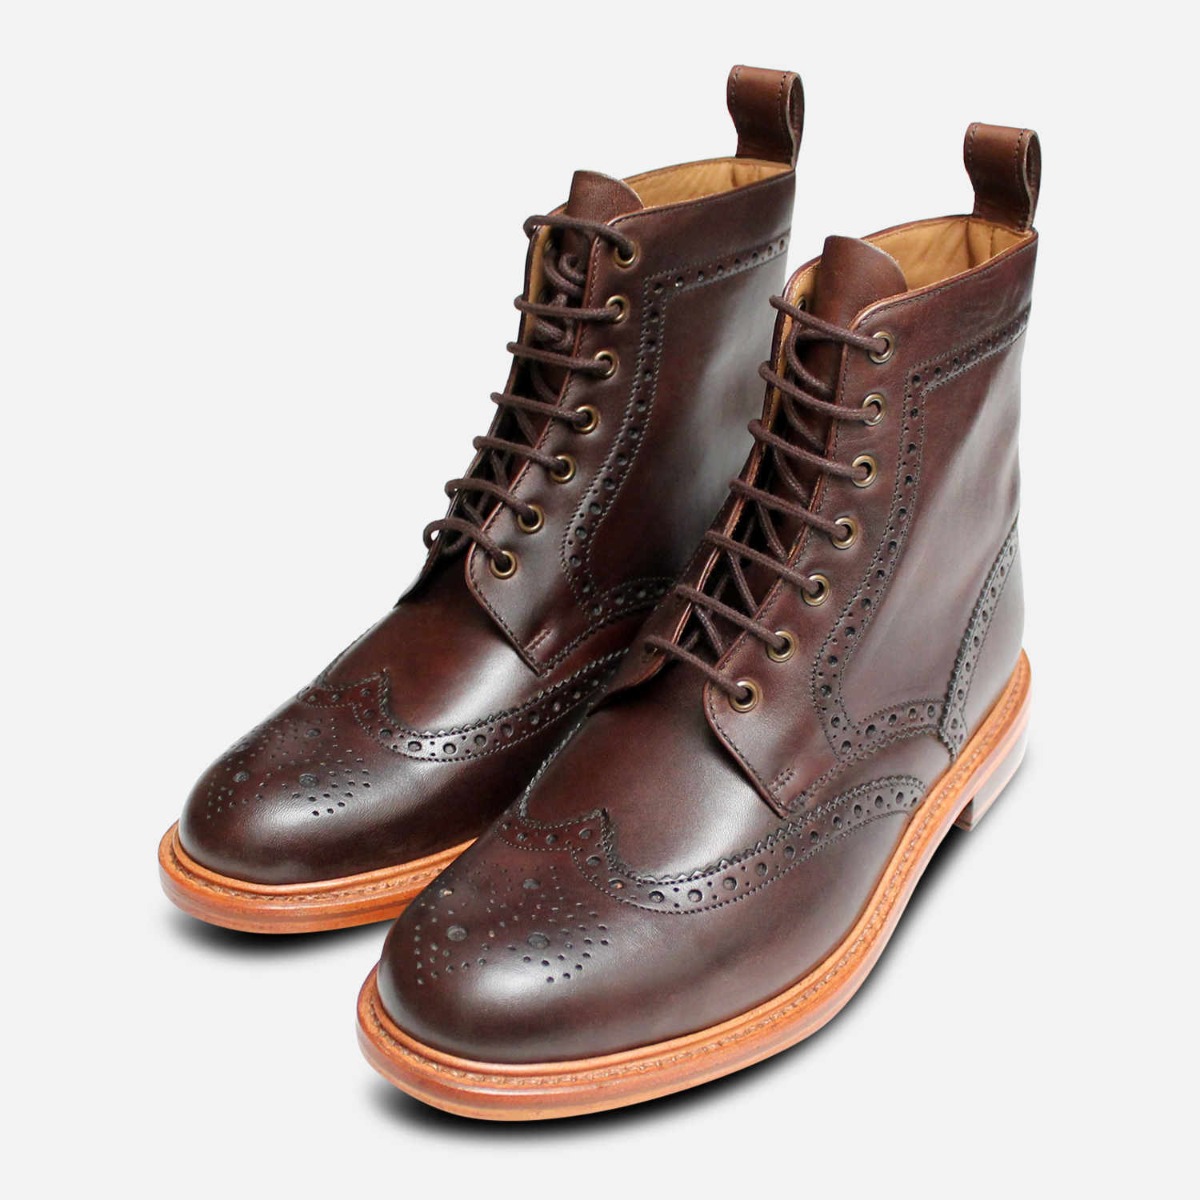 Chocolate Brown Goodyear Welted Country Brogue Boots | eBay